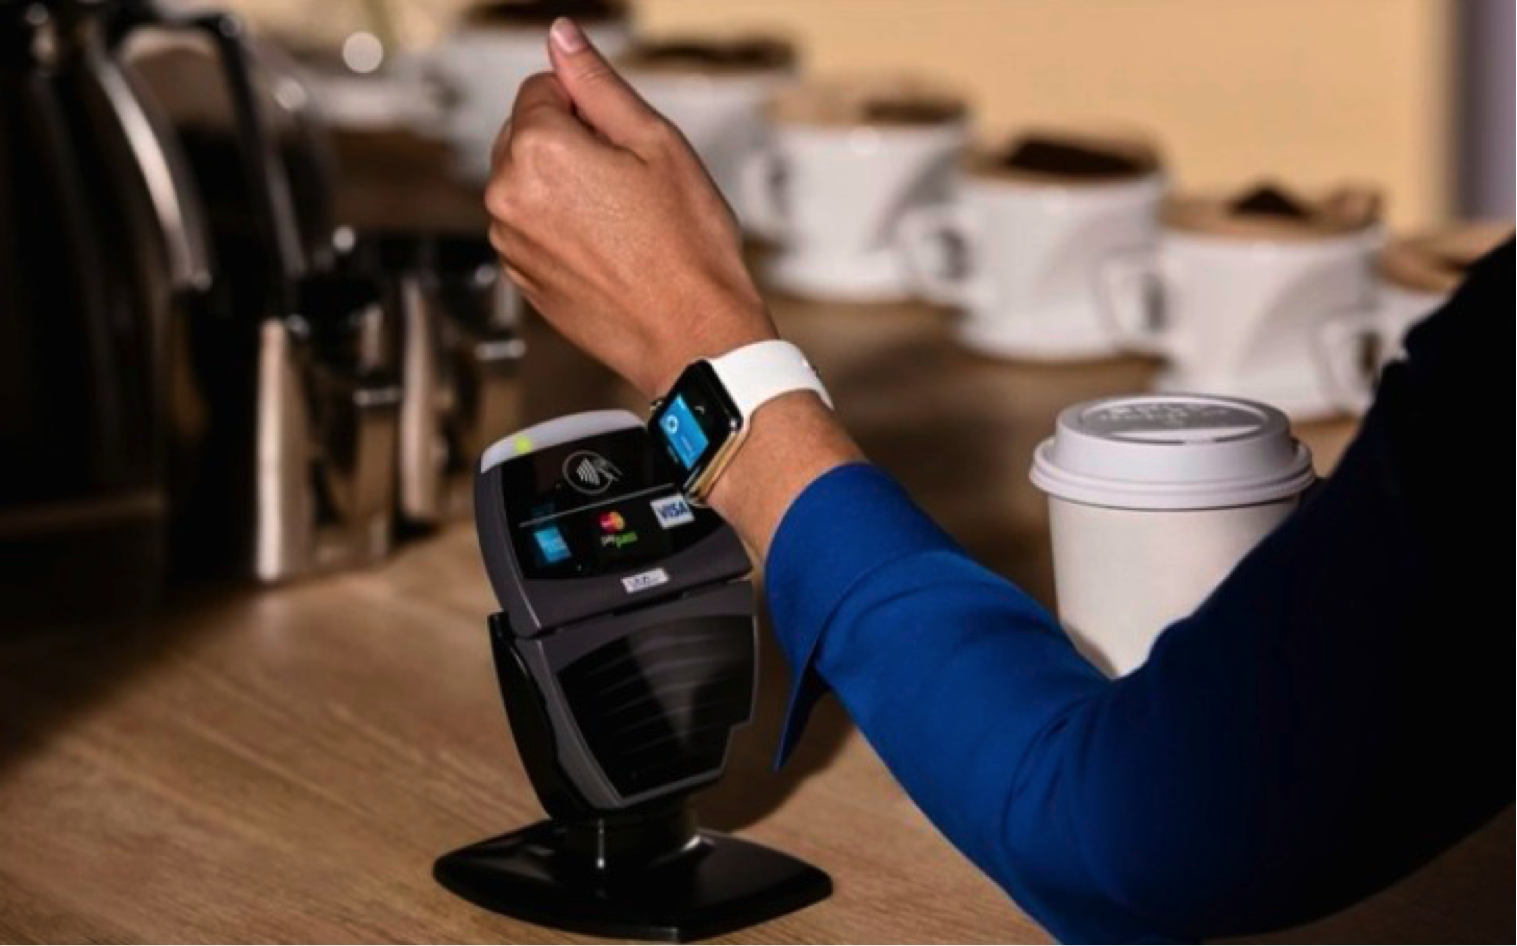 What the Apple Watch means for hotels